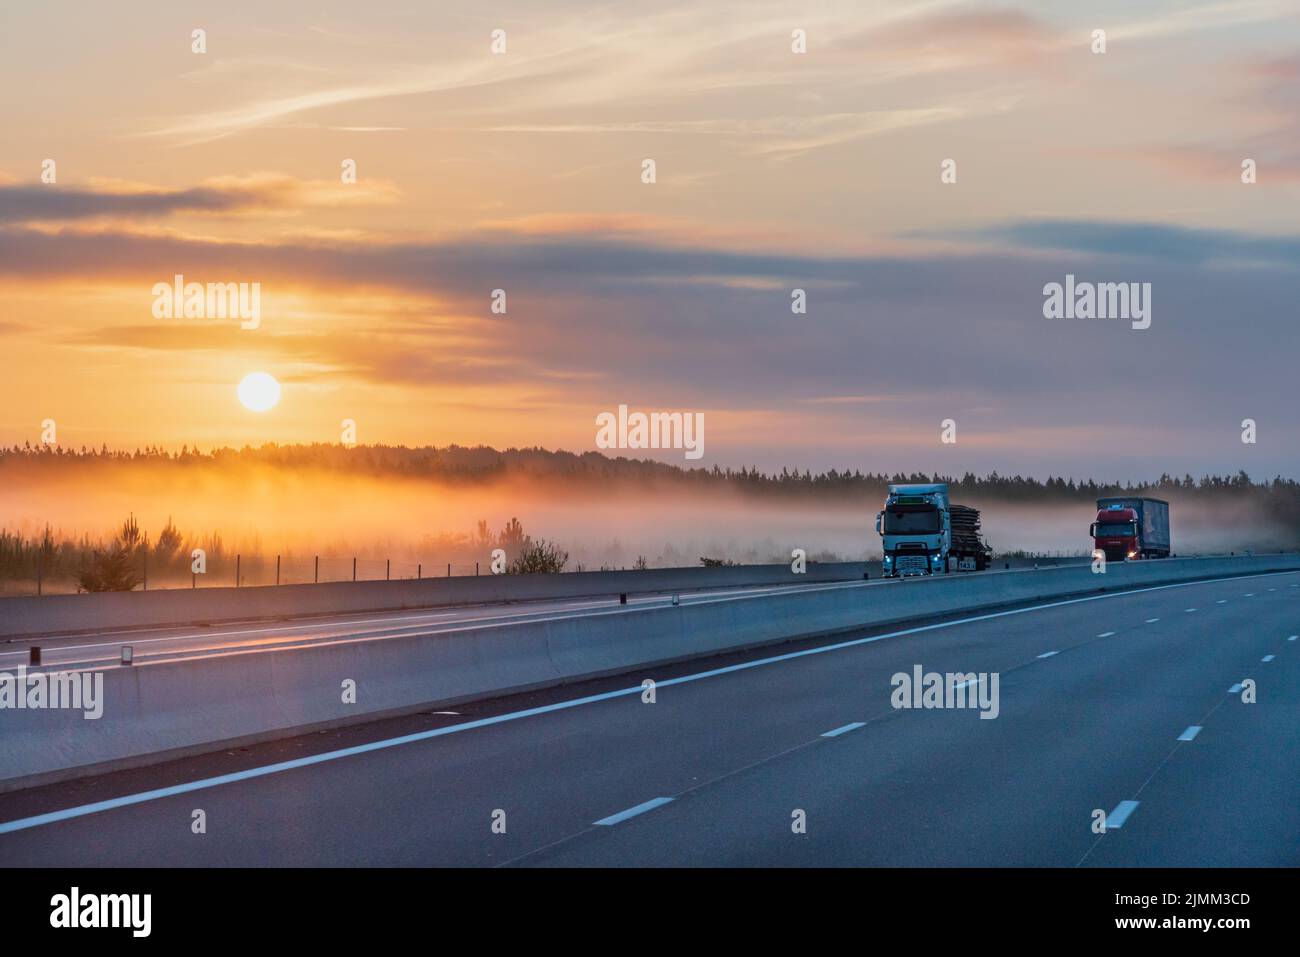 Landscape of a highway at dawn with the sun beginning to rise, two trucks circulating and the mist tucked between the trees. Stock Photo